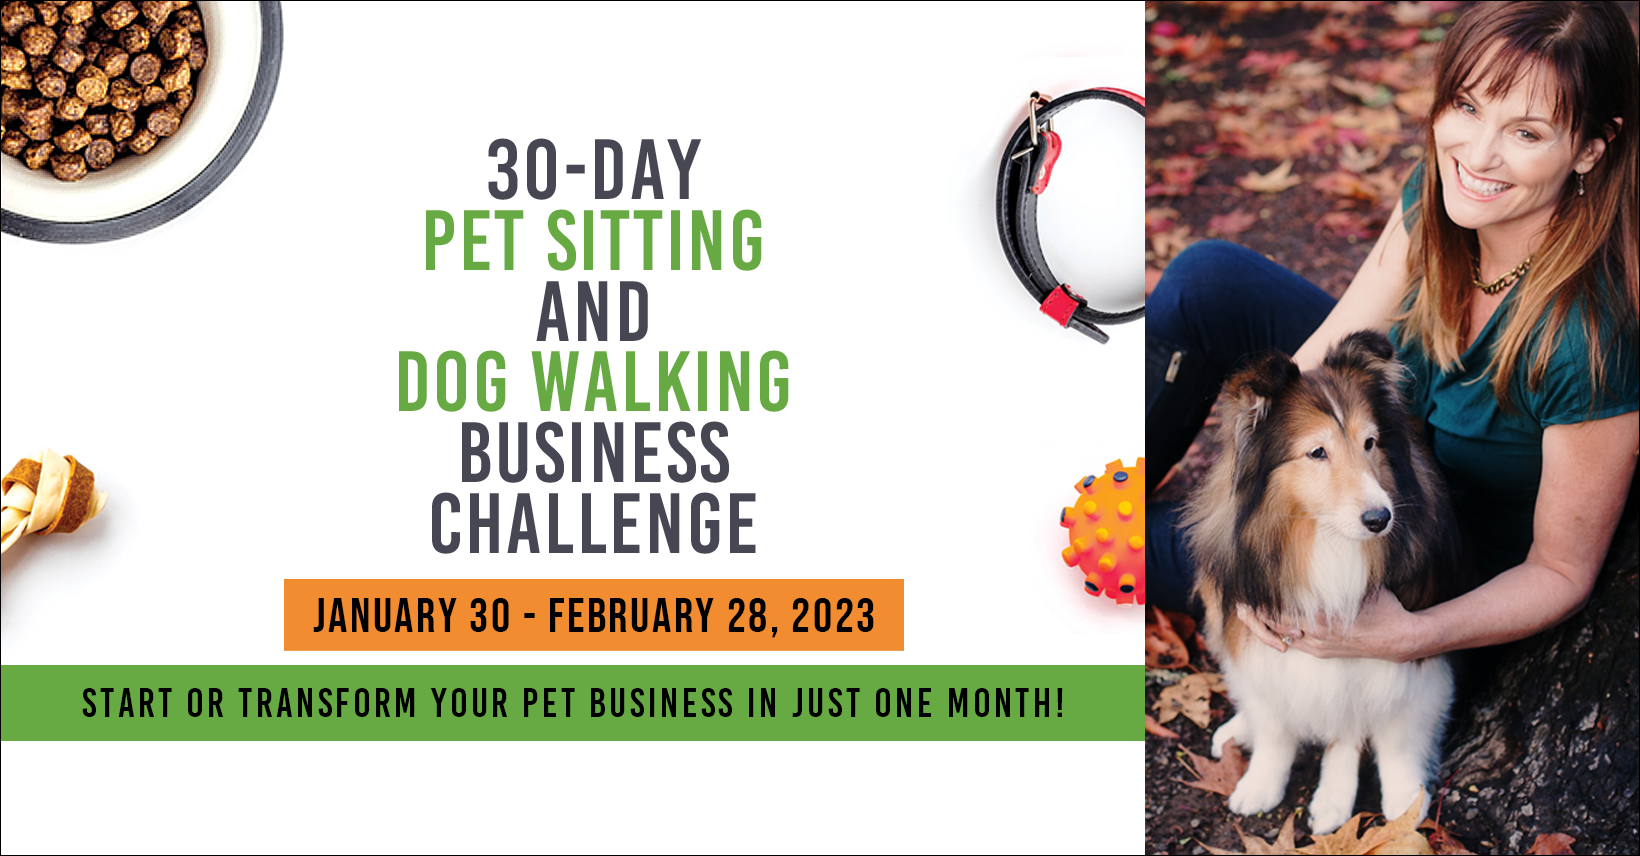 30-Day Pet Sitting and Dog Walking Business Challenge - Prosperous Pet  Business Online Conference